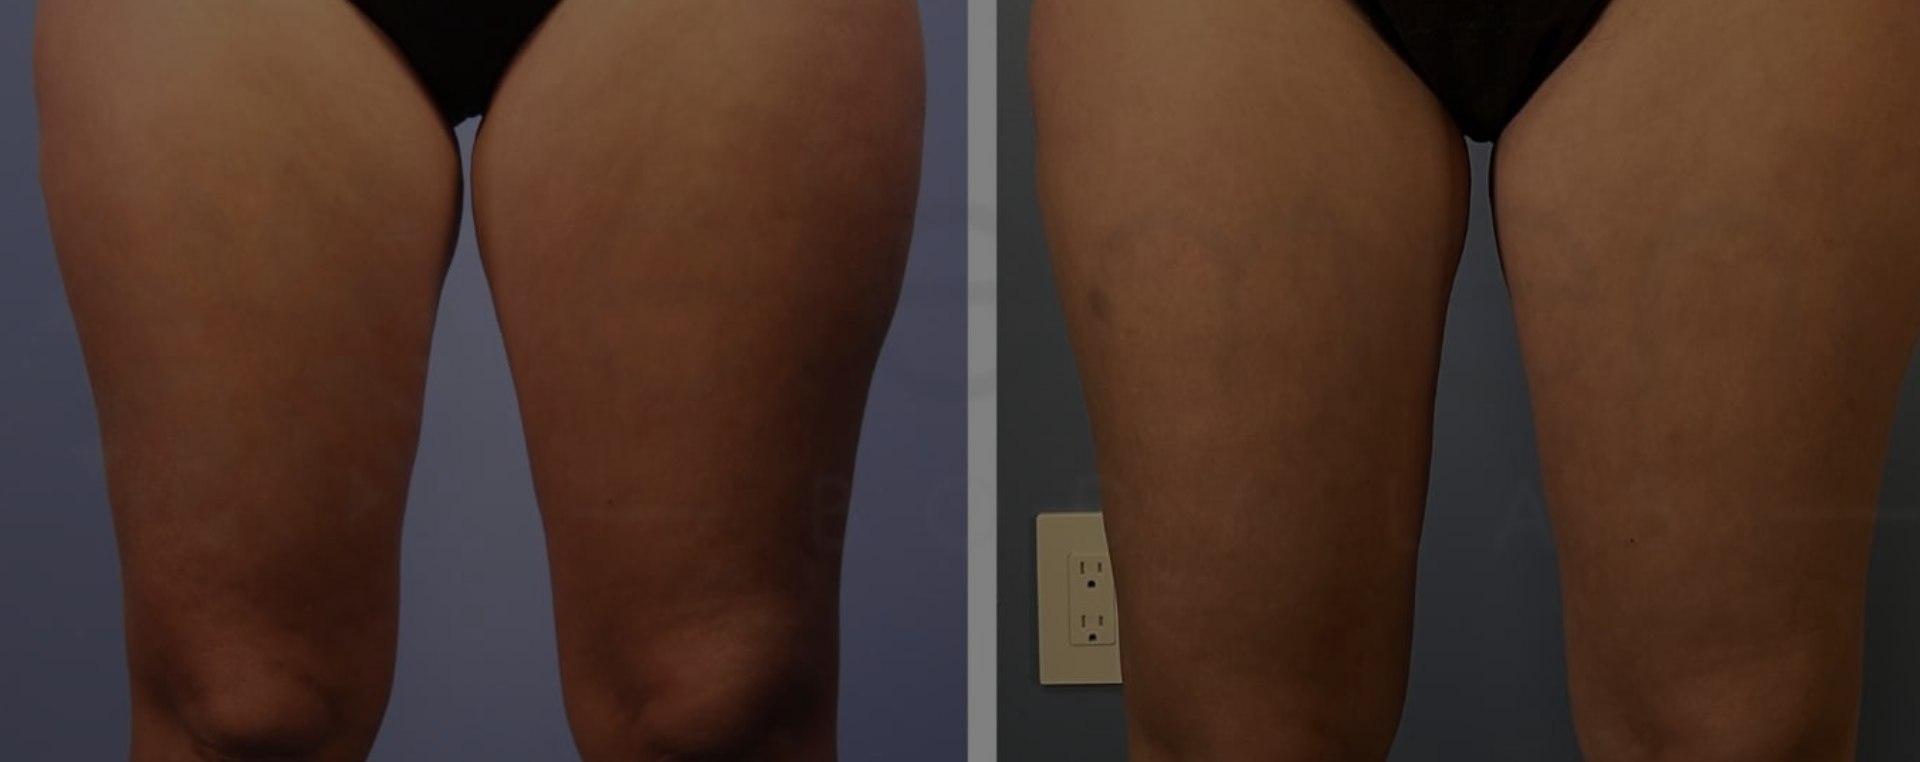 Thigh fat reduction